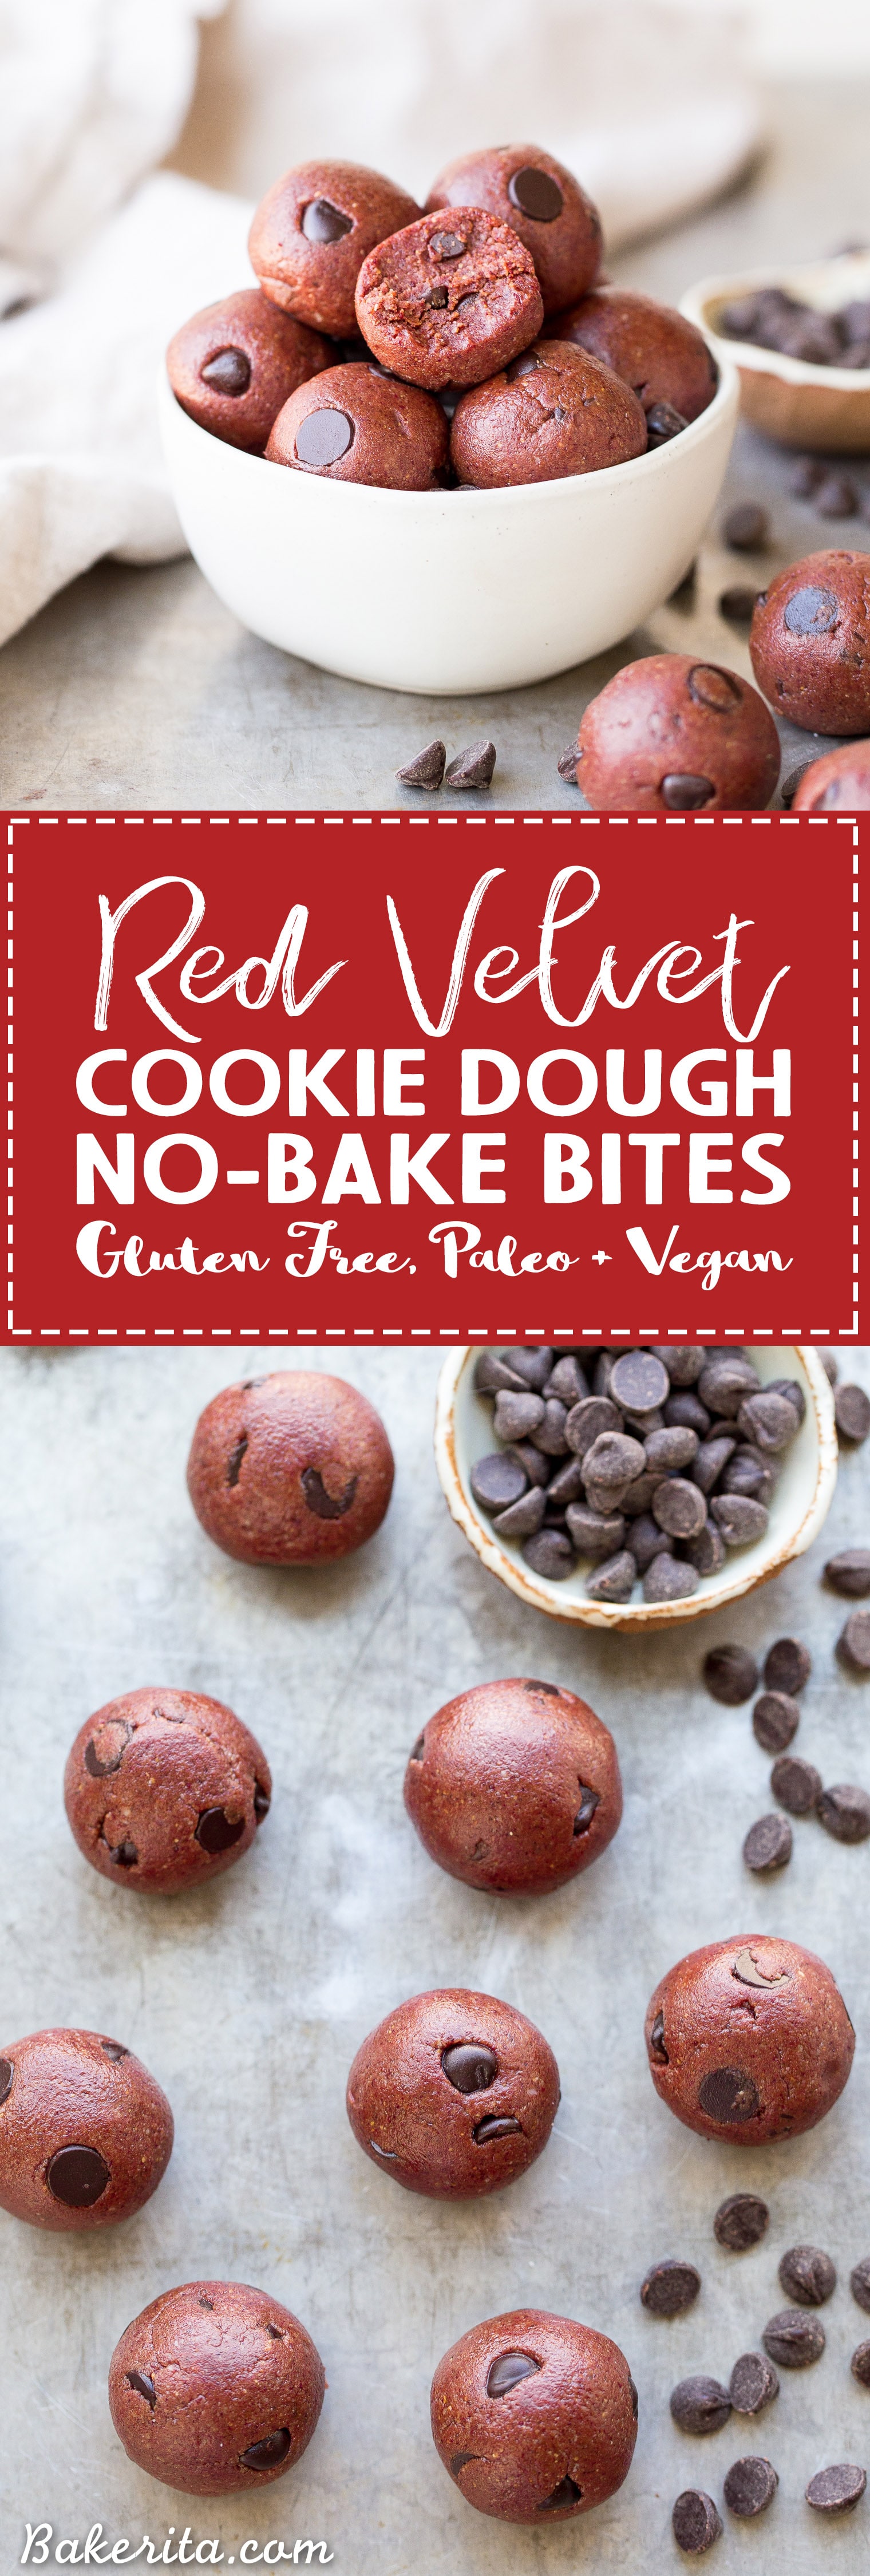 These Red Velvet Cookie Dough Bites are the perfect quick & easy snack or dessert! These gluten-free, paleo and vegan cookie dough bites are naturally tinted with a healthy superfood beet powder.